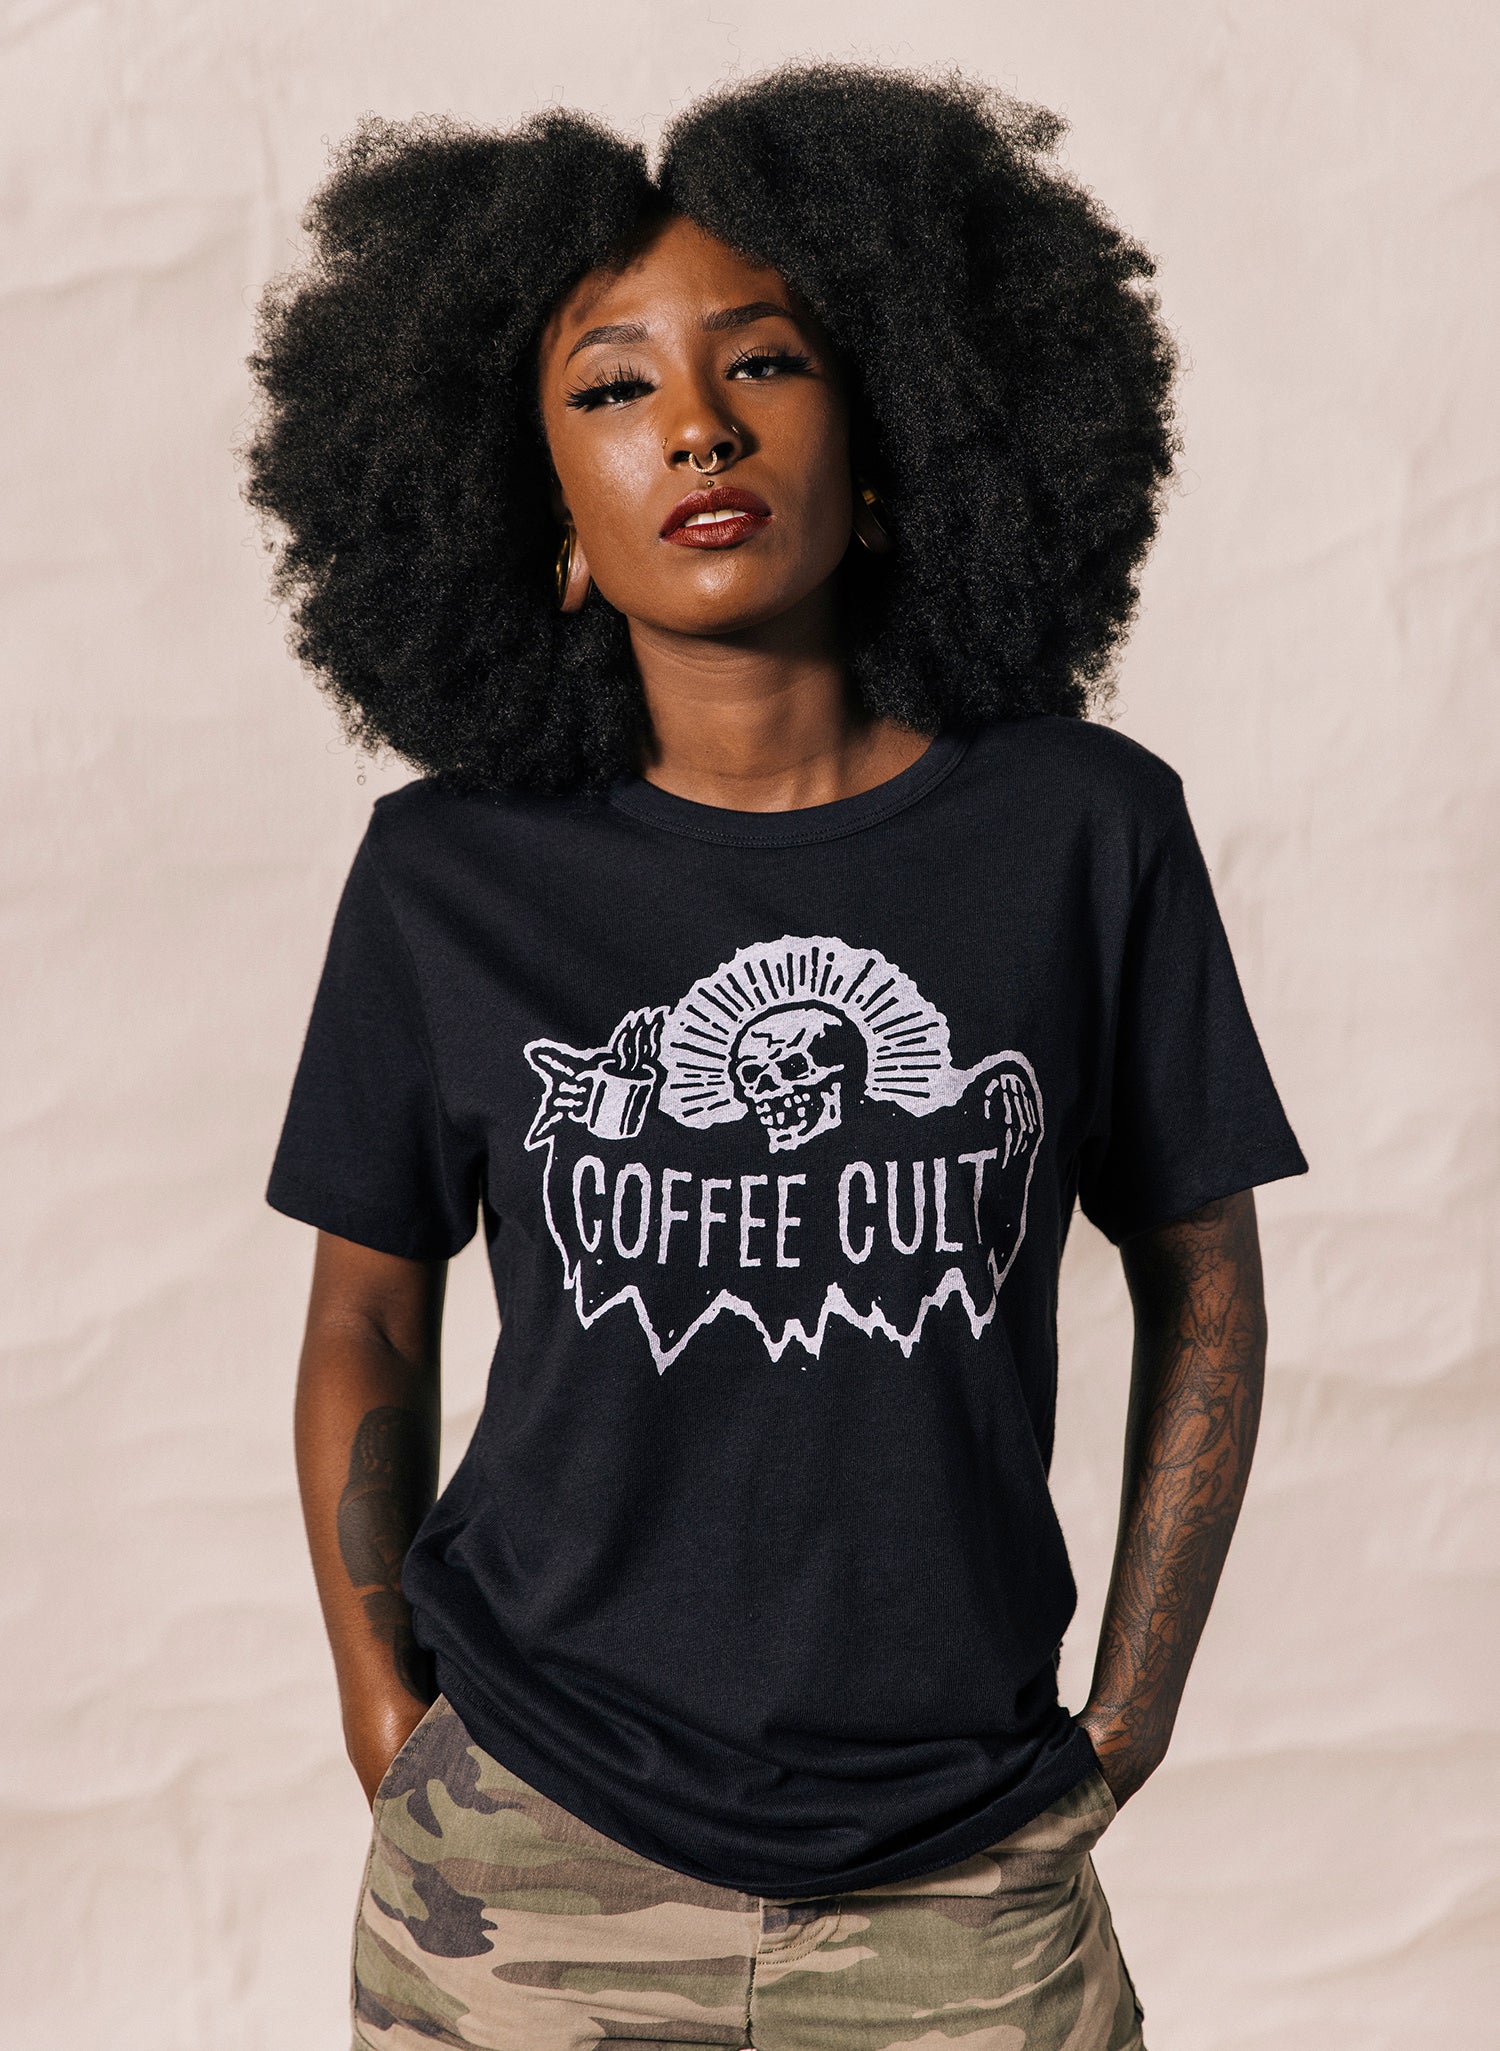 Coffee Cult Skeleton Bones T-shirt for Foodies, Coffee Lovers, Barista, Cafe